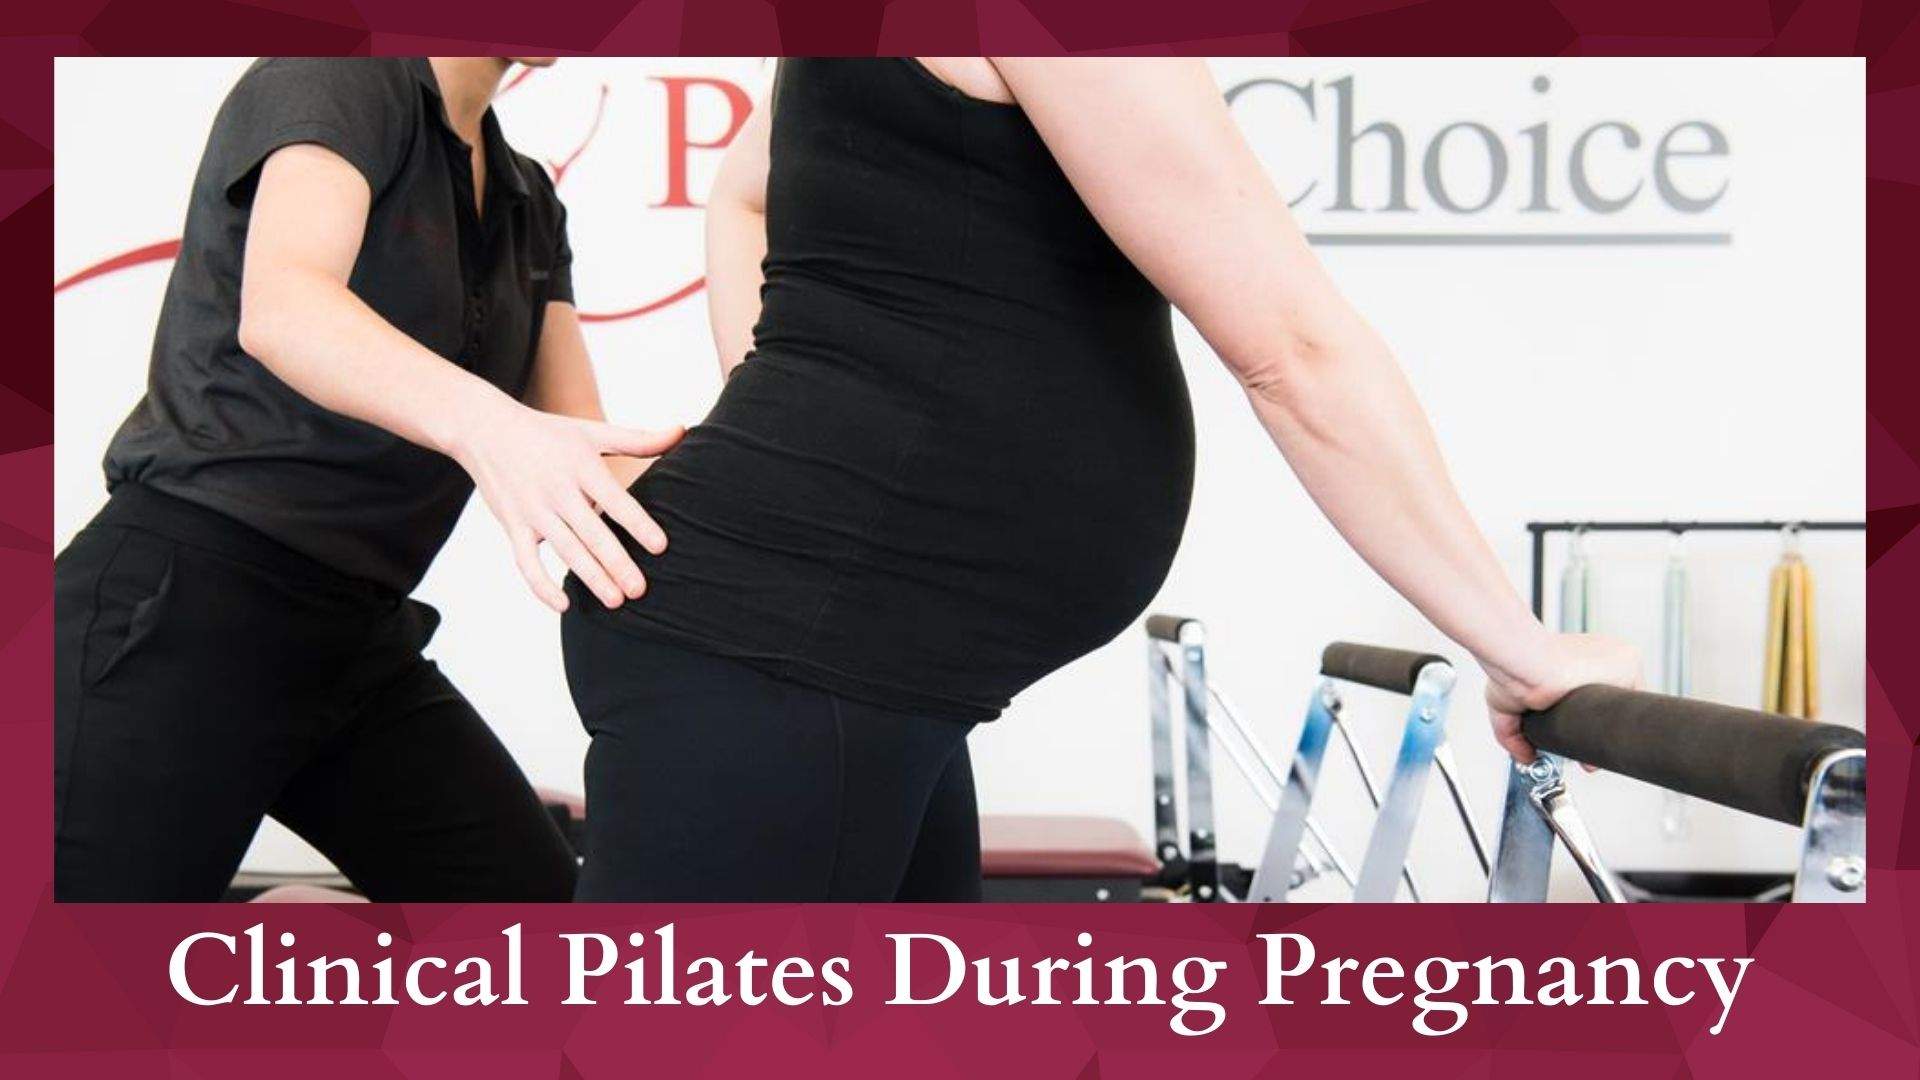 The Pivotal Role of Clinical Pilates During Pregnancy